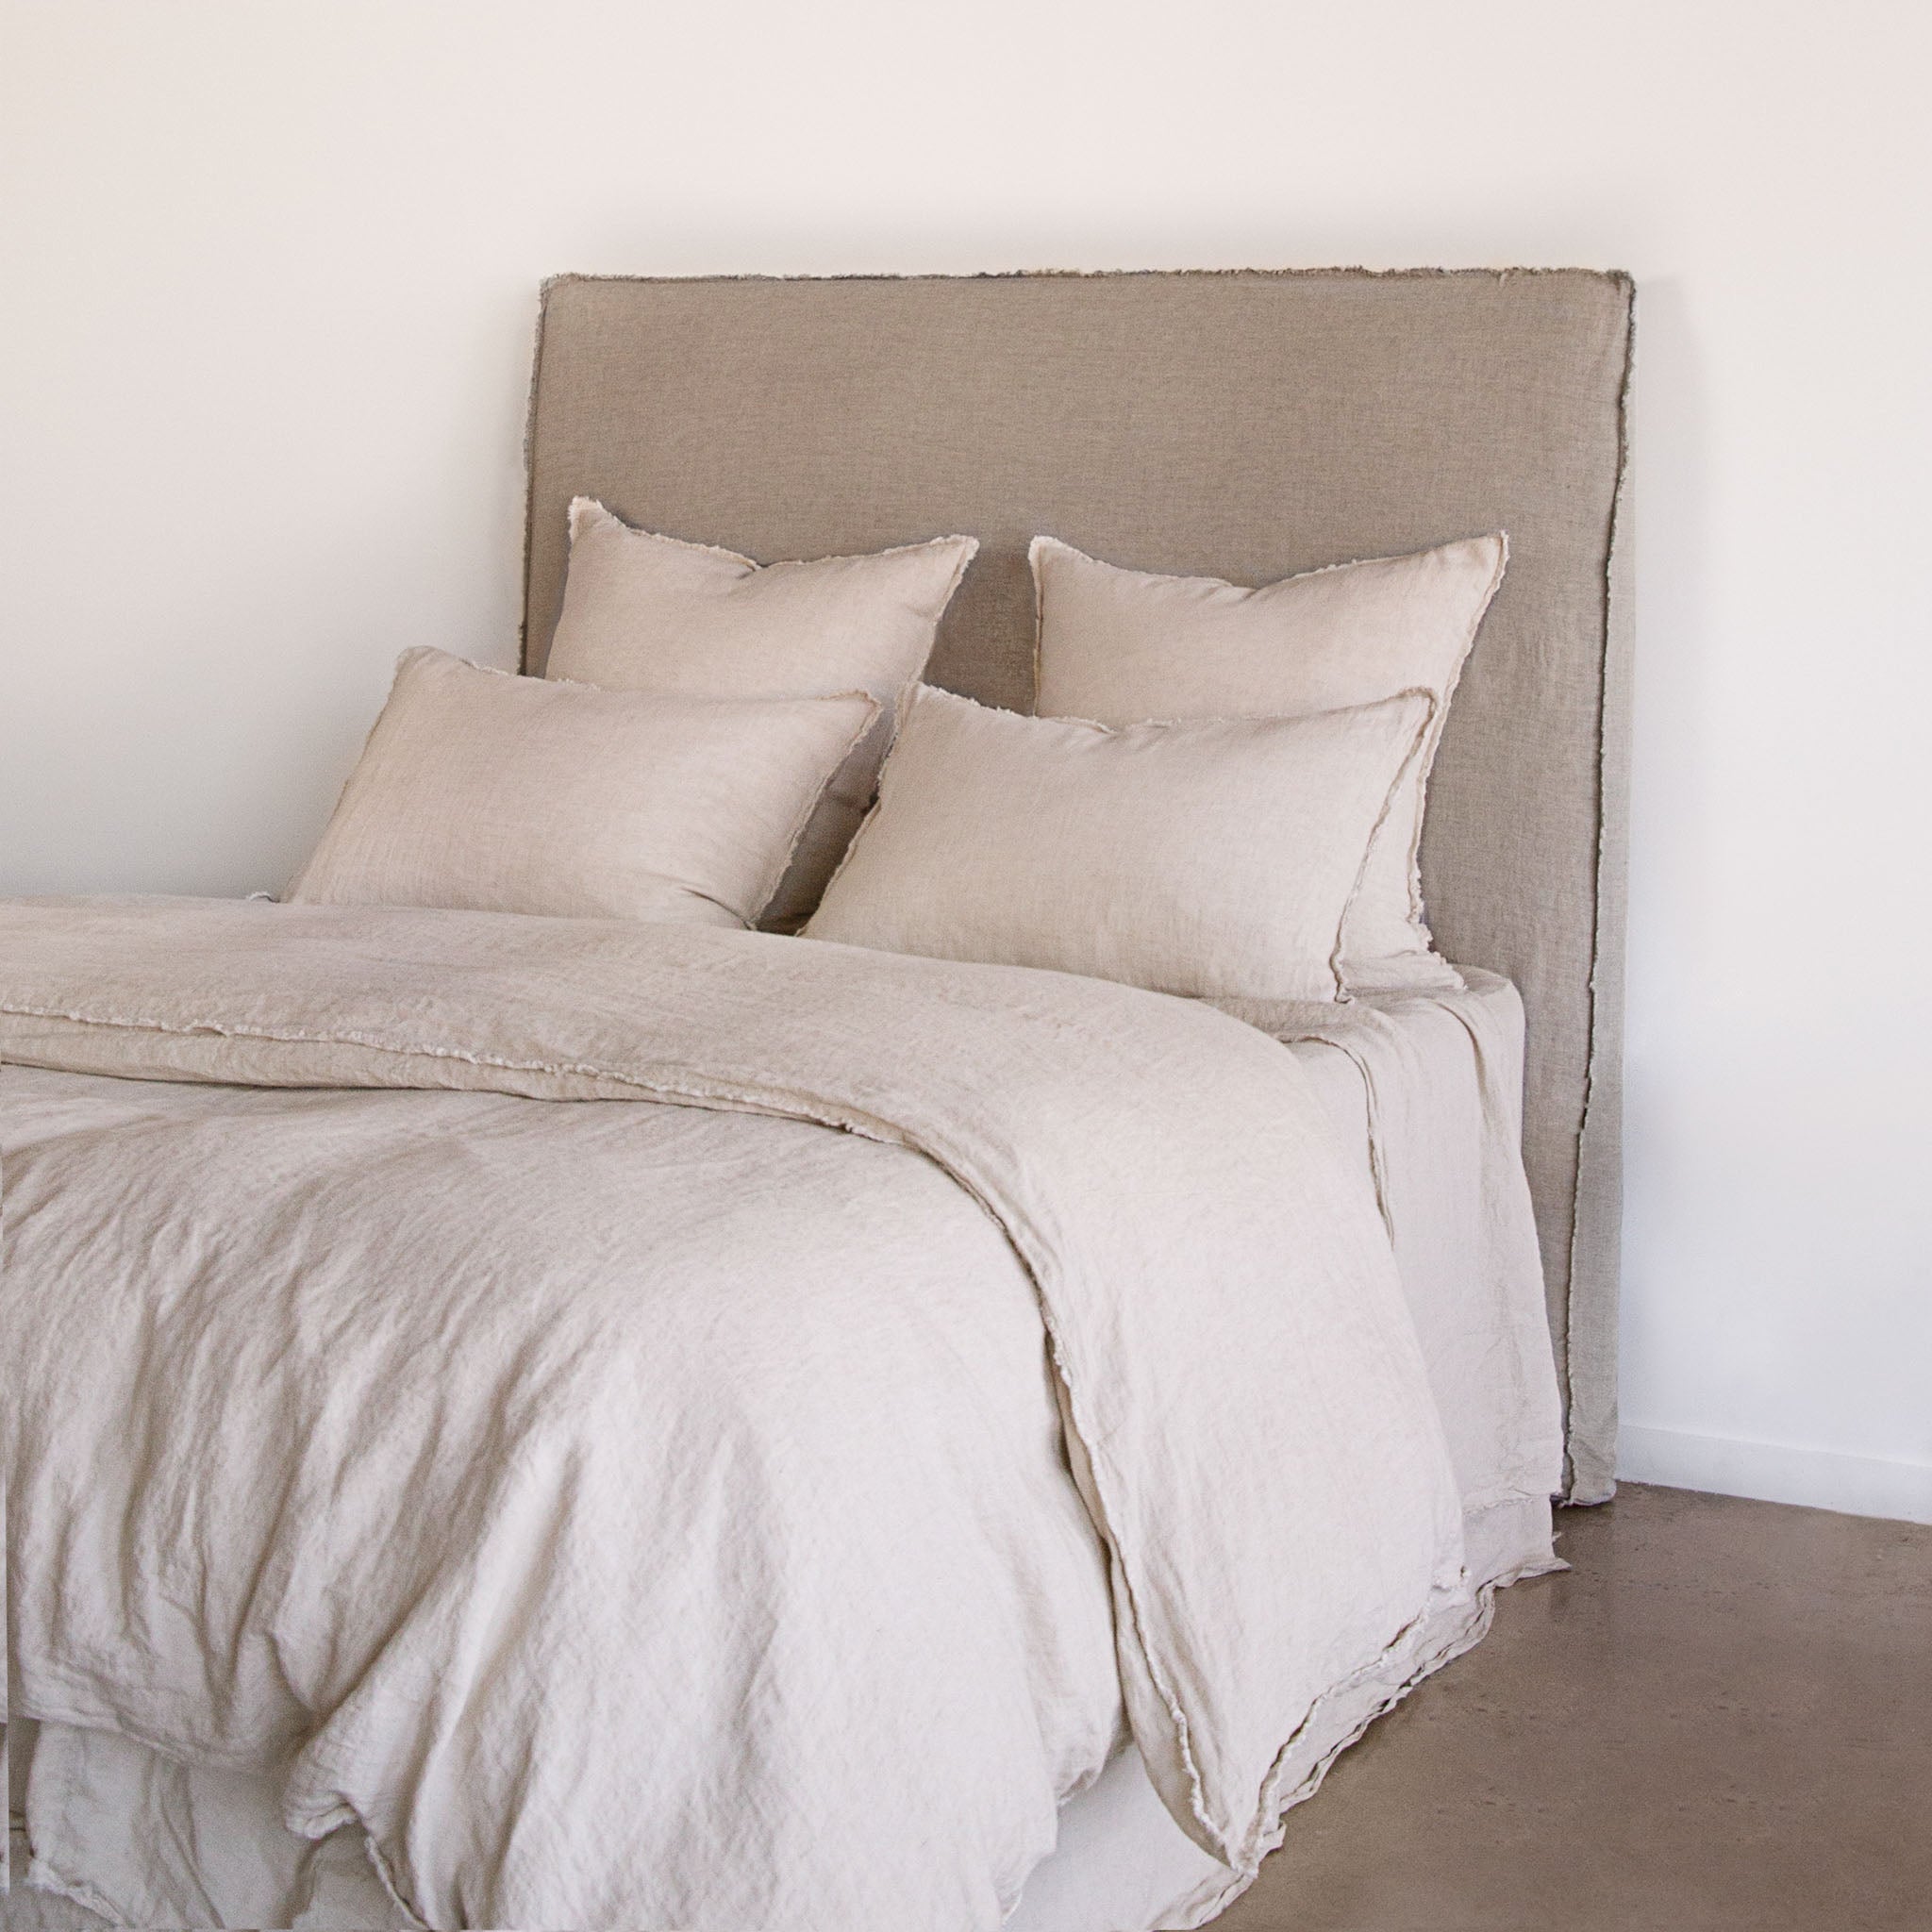 Linen Bedhead & Cover | Classic Taupe | Hale Mercantile Co.